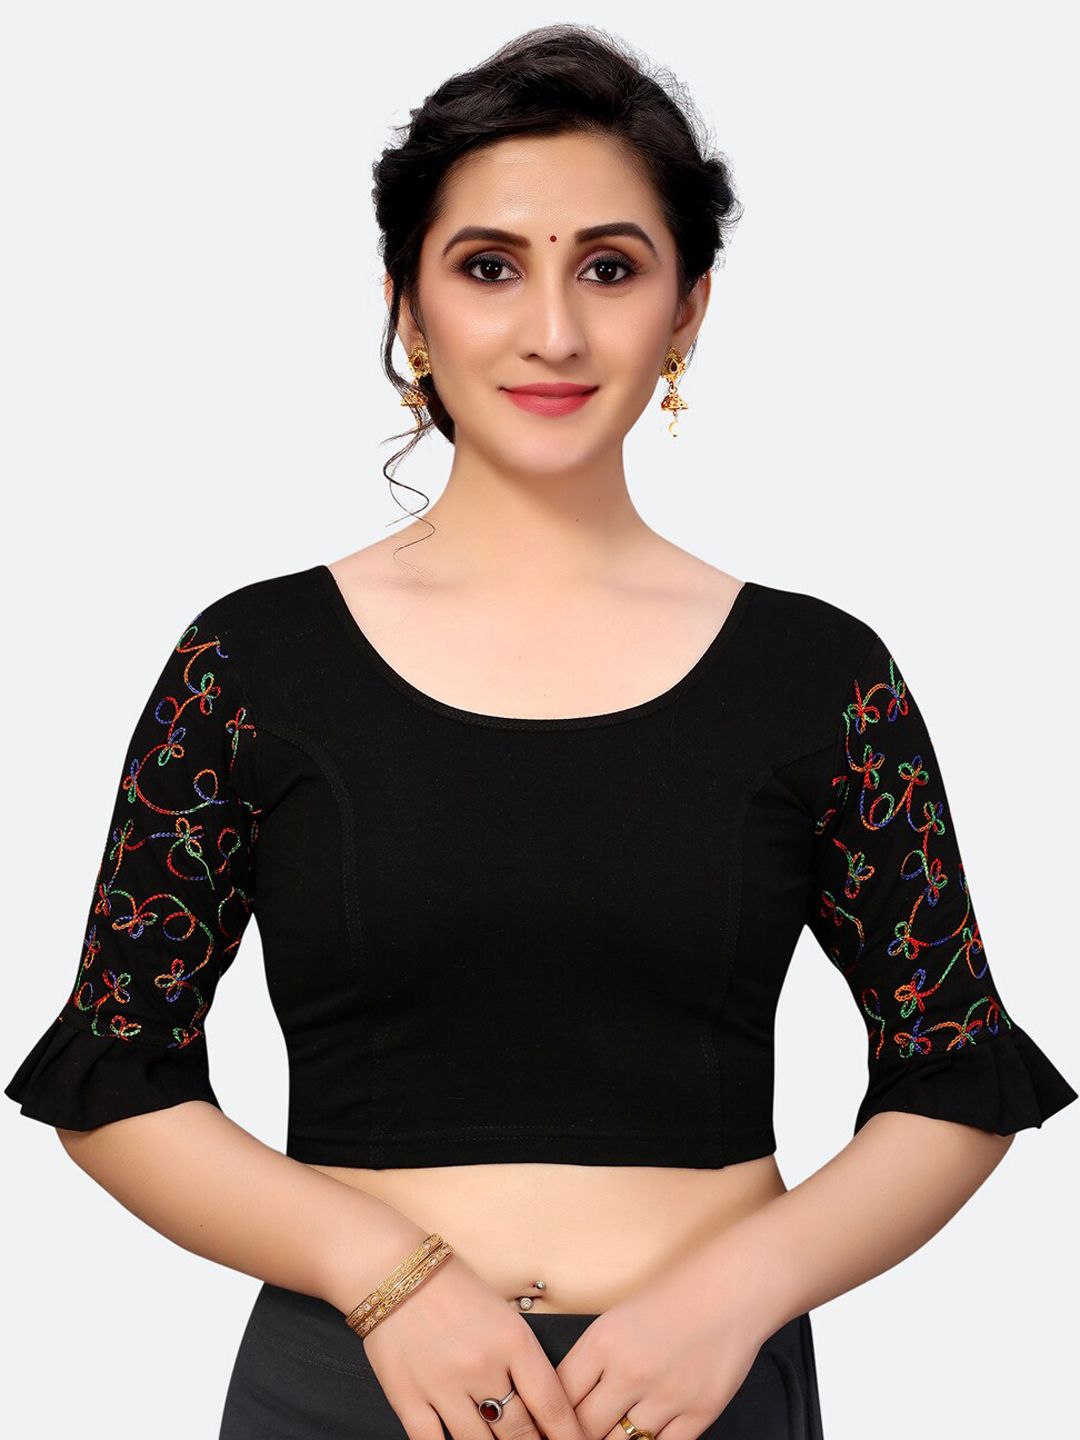 SIRIL Women Black & Red Solid Woven-Design Saree Blouse Price in India